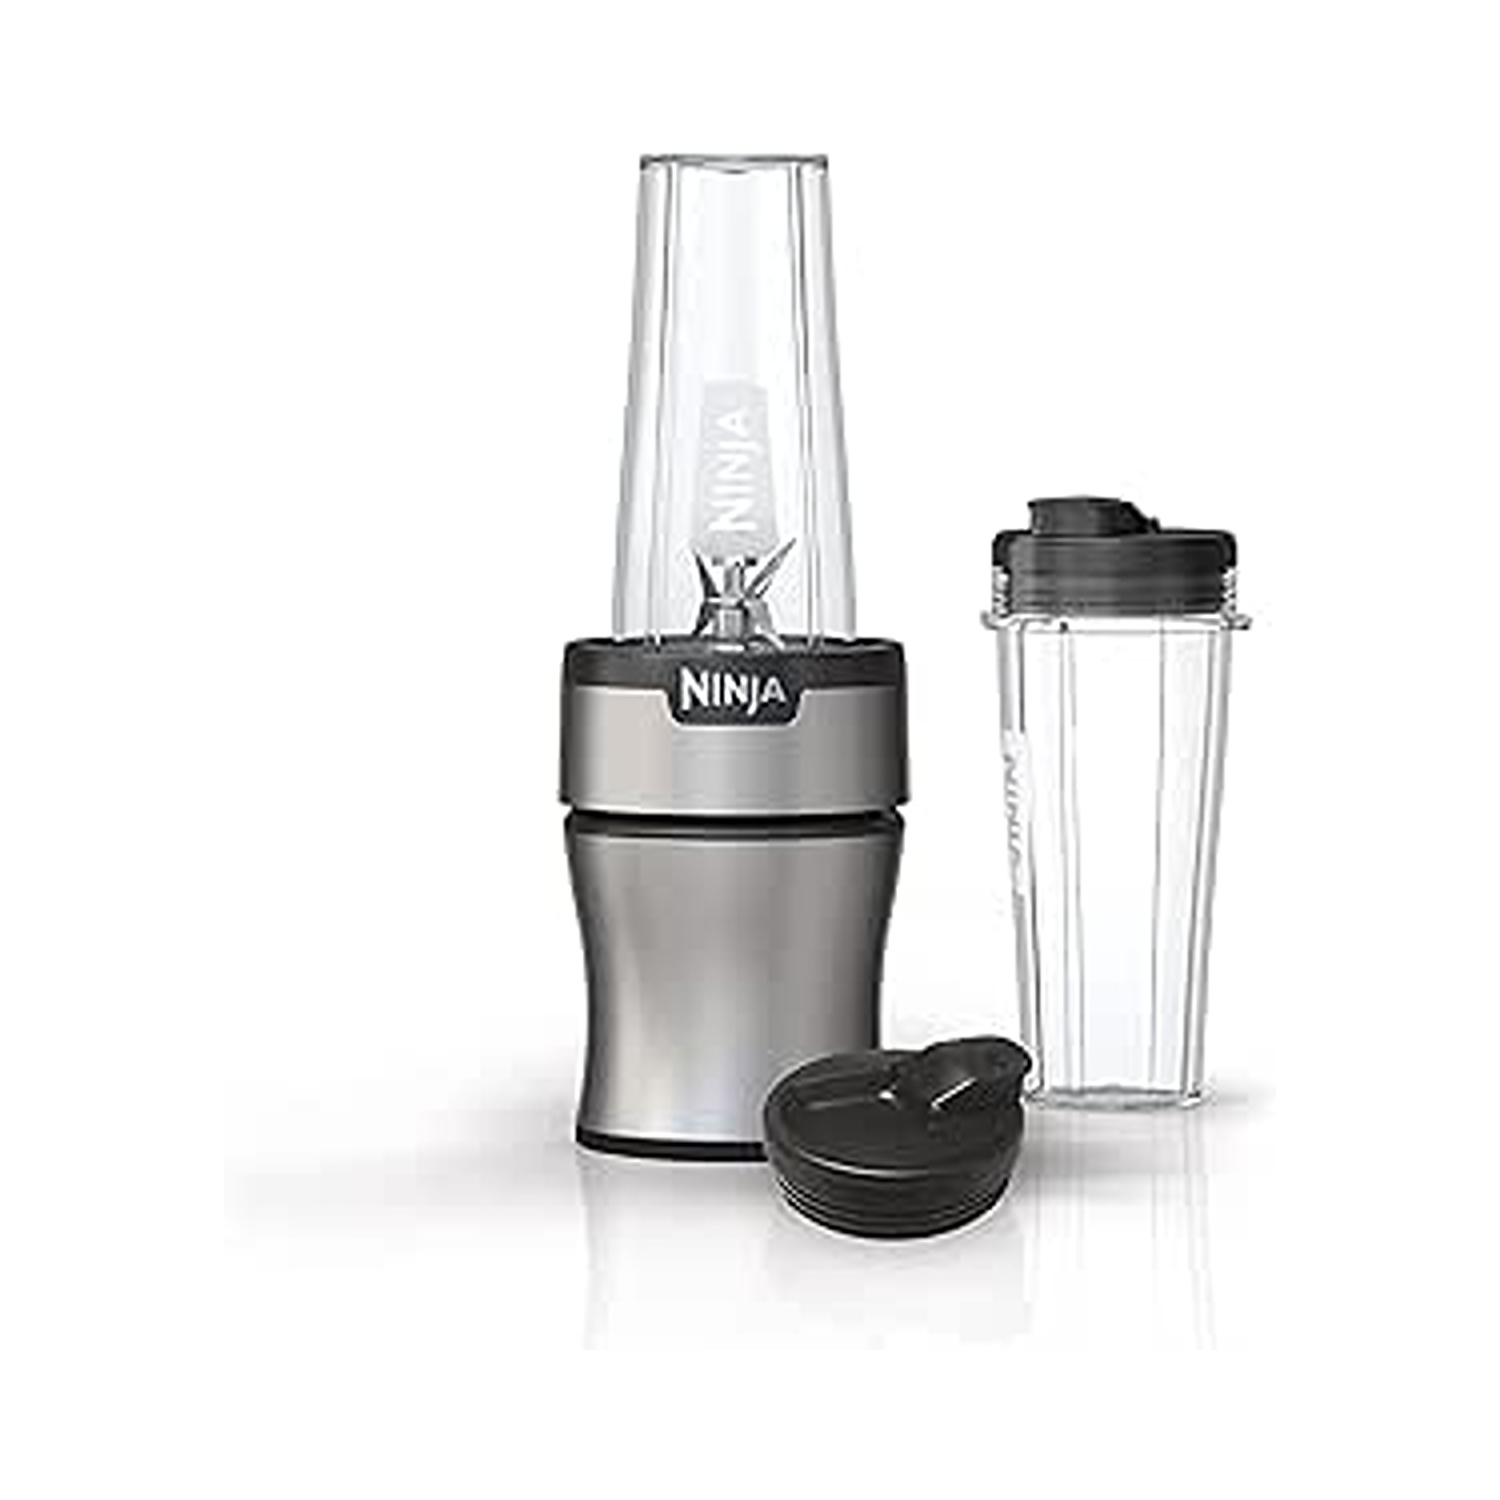 NINJA 700W Personal Nutri-Blender With Ice-Crushing Technology - Silver